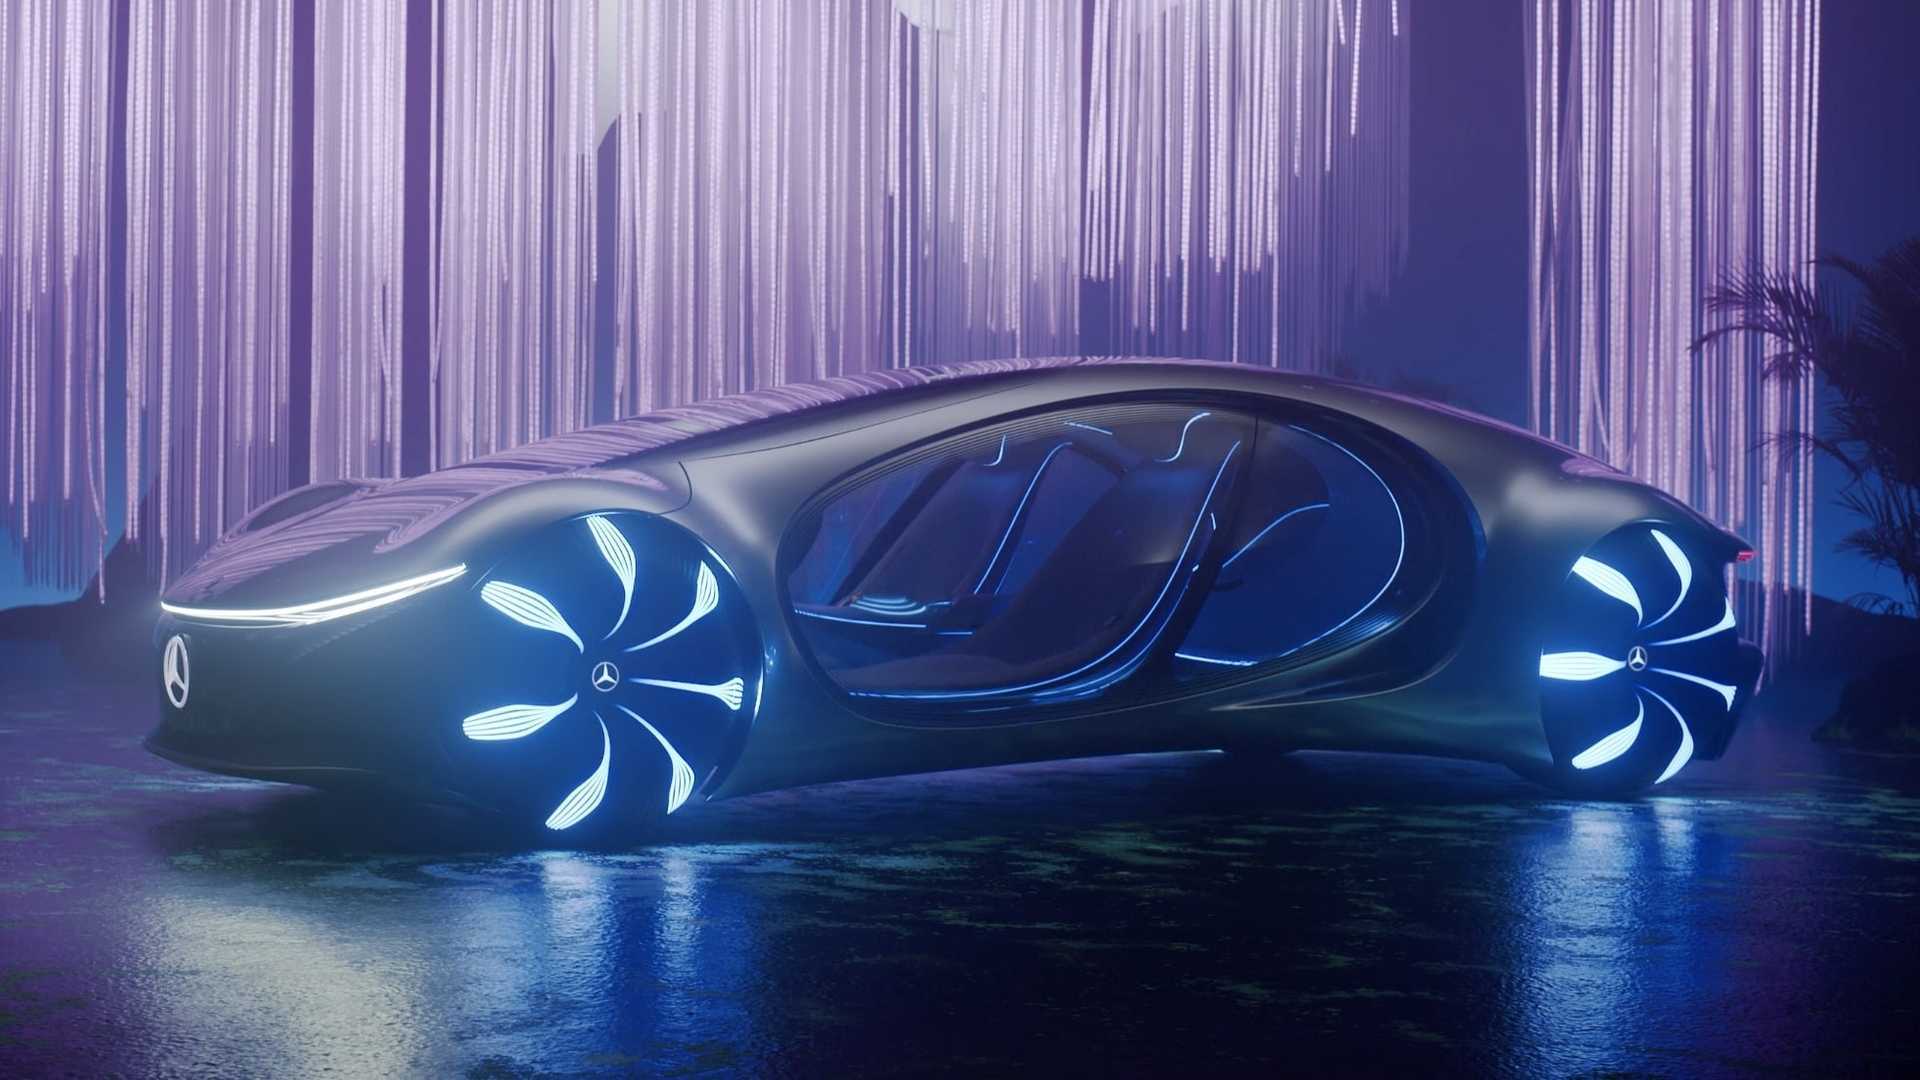 Ces Mercedes Benz Showcases Their Concept Vision Avtr In